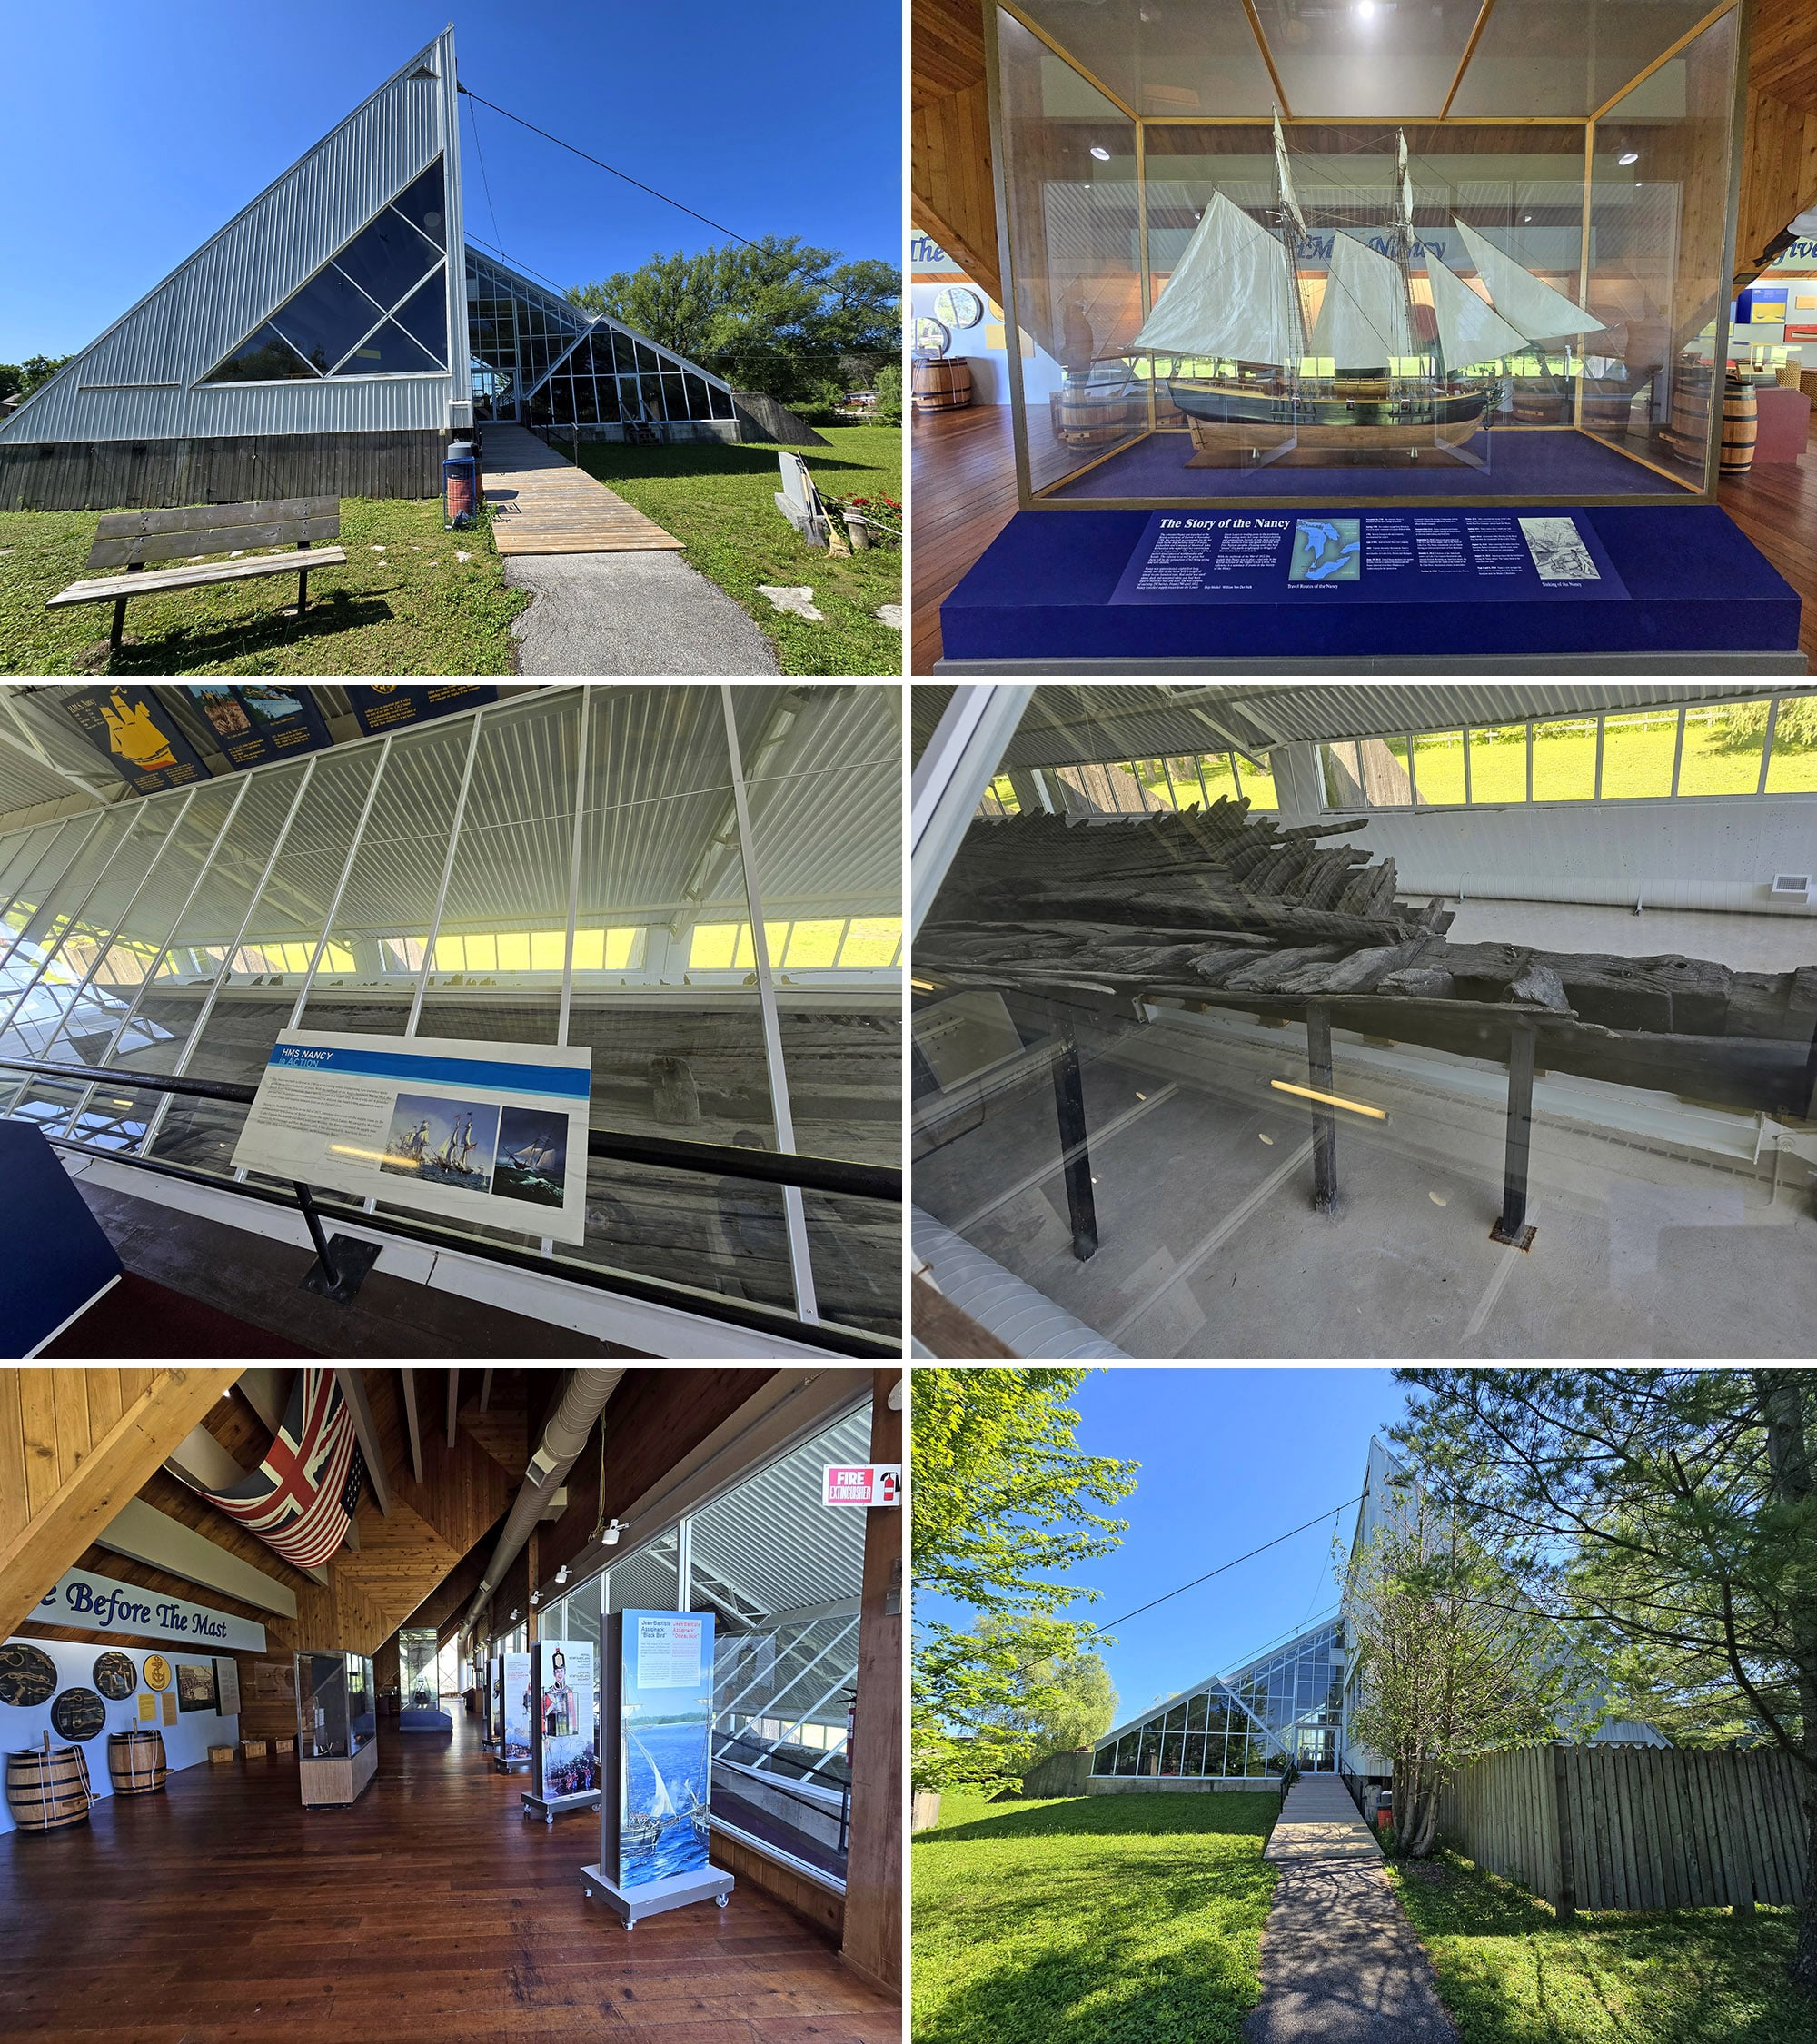 6 part image showing various views of and inside the Nancy Island museum.